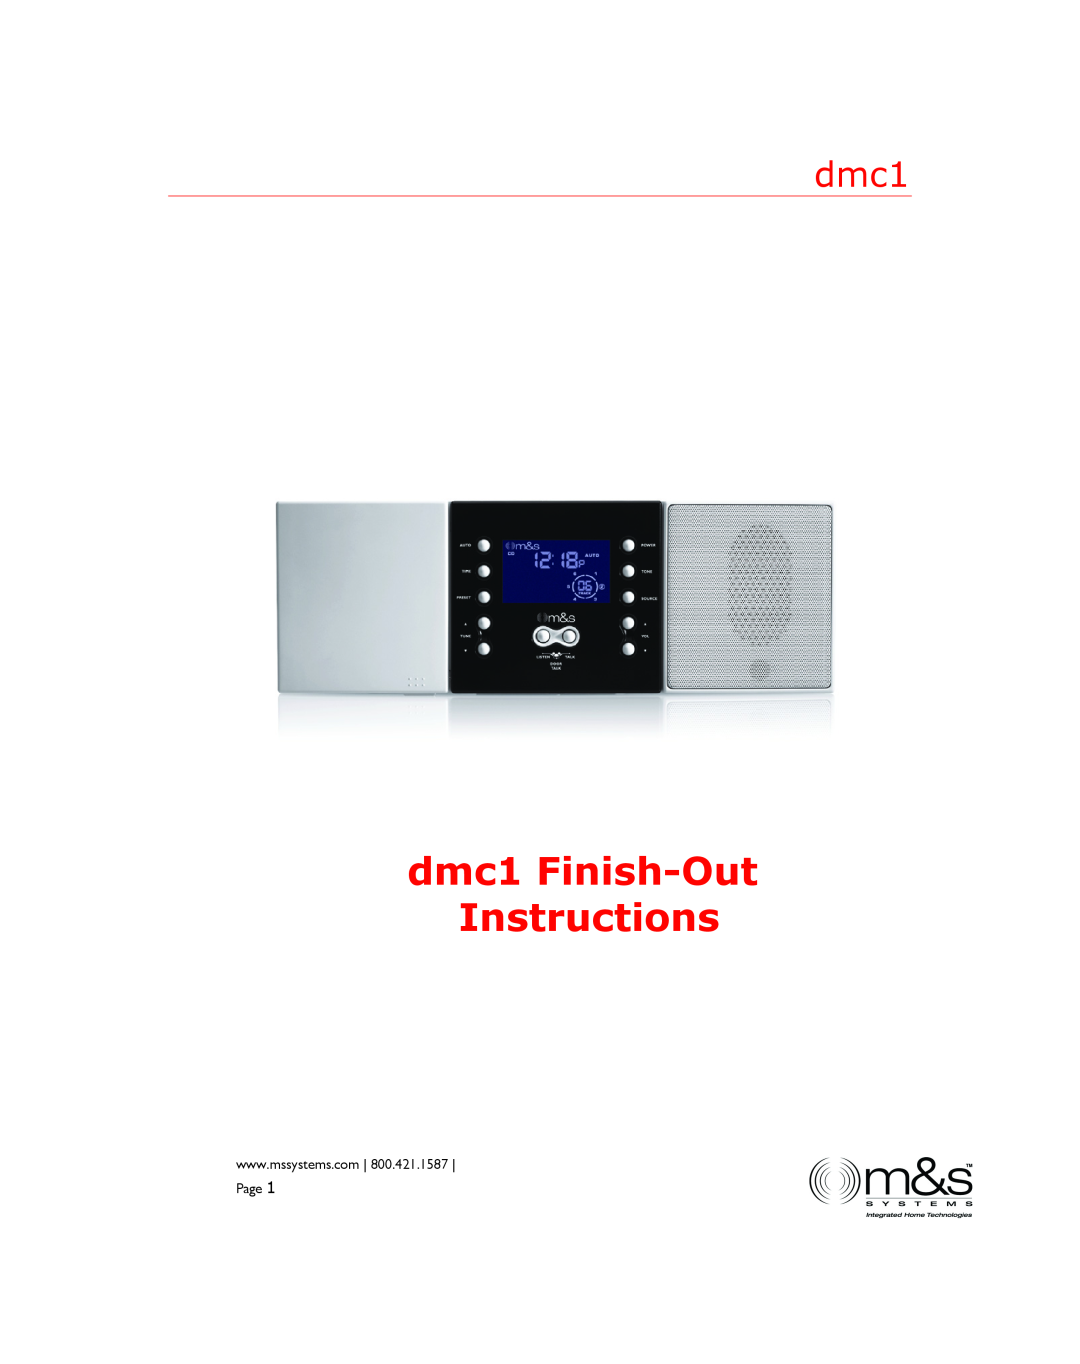 M&S Systems manual dmc1 Finish-Out Instructions, Page 